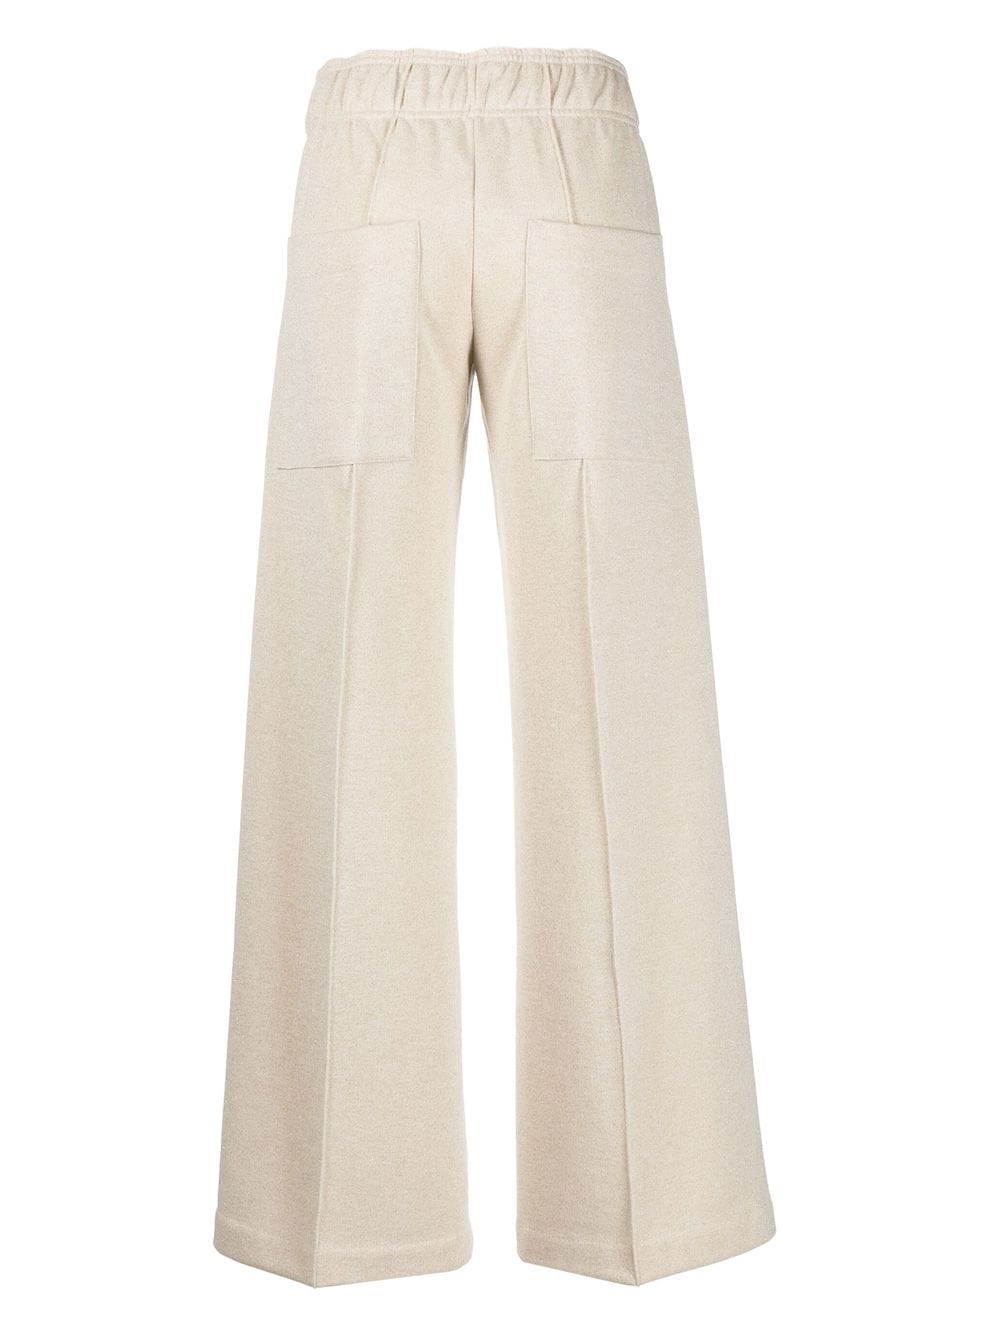 Wide trousers in organic cotton